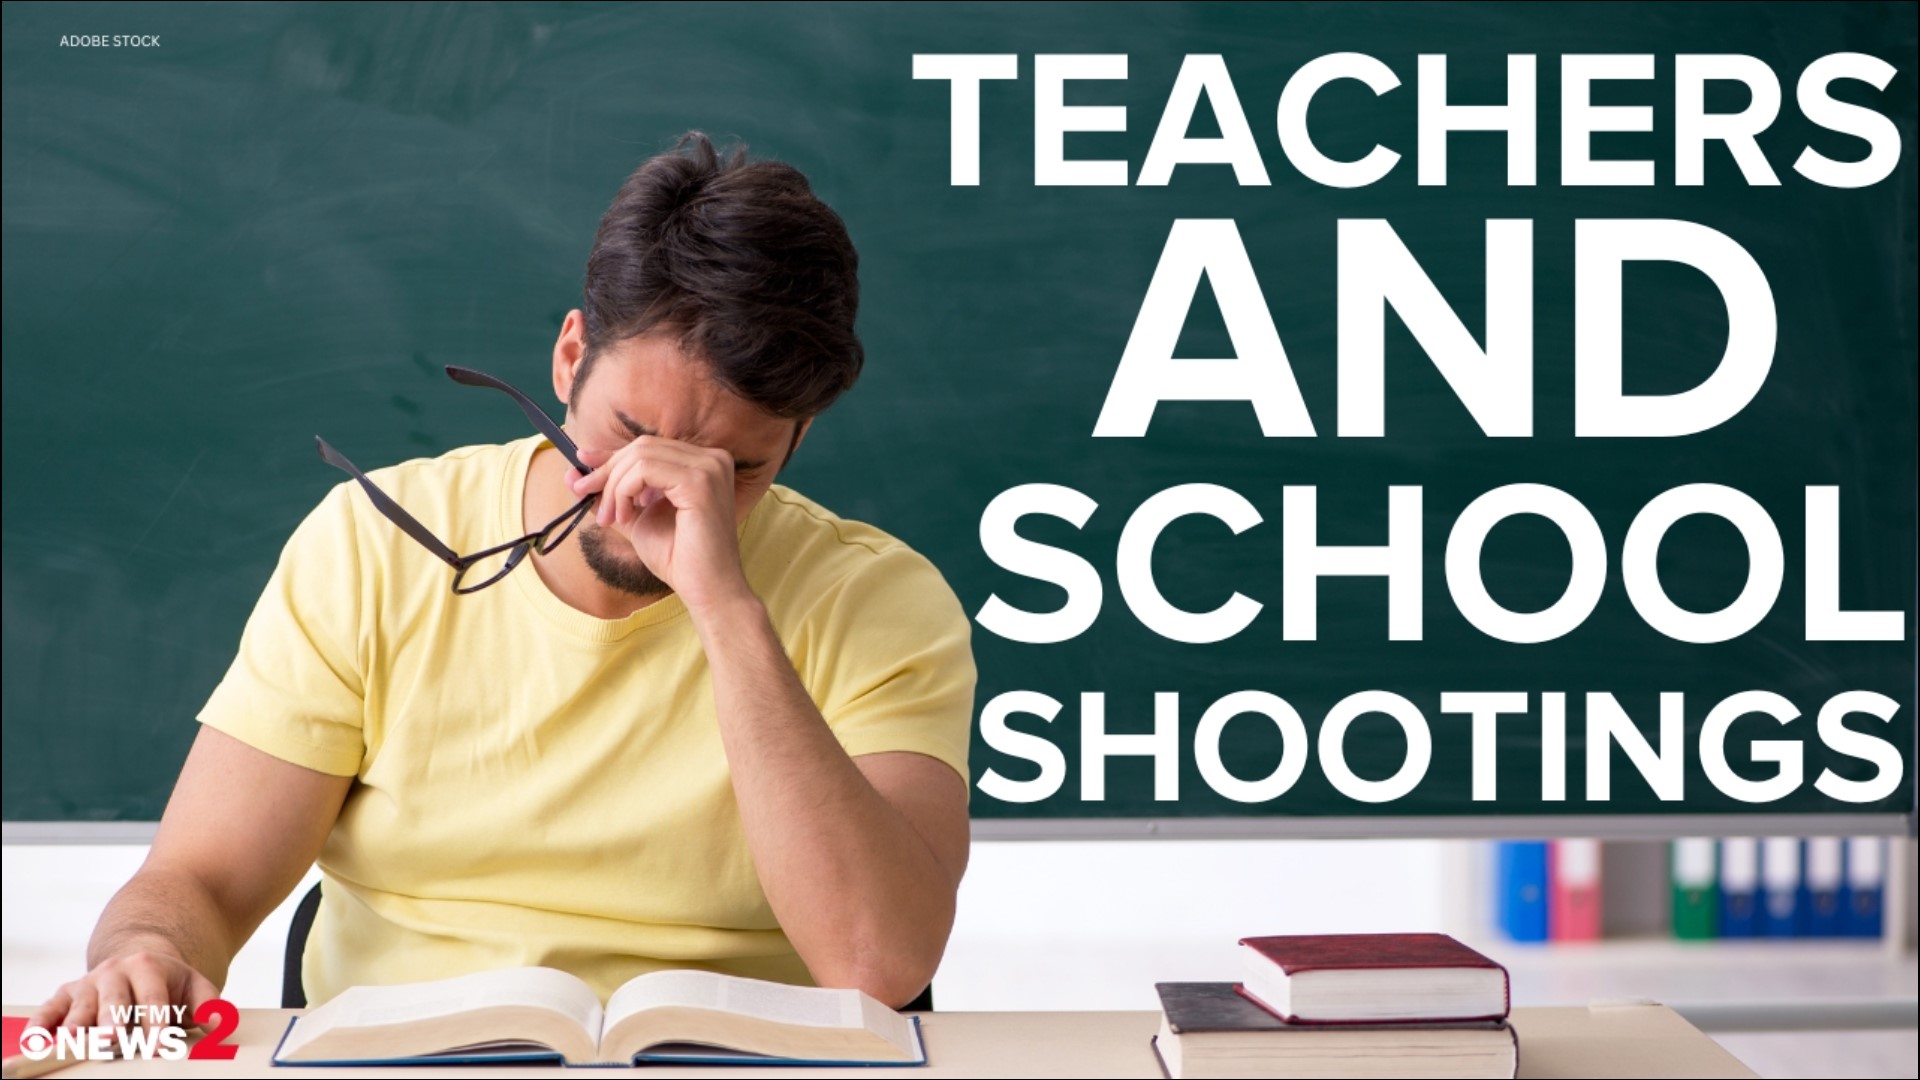 Several Greensboro area teachers – retired and still in the classroom - said the thought of an active shooter situation has crossed their mind.